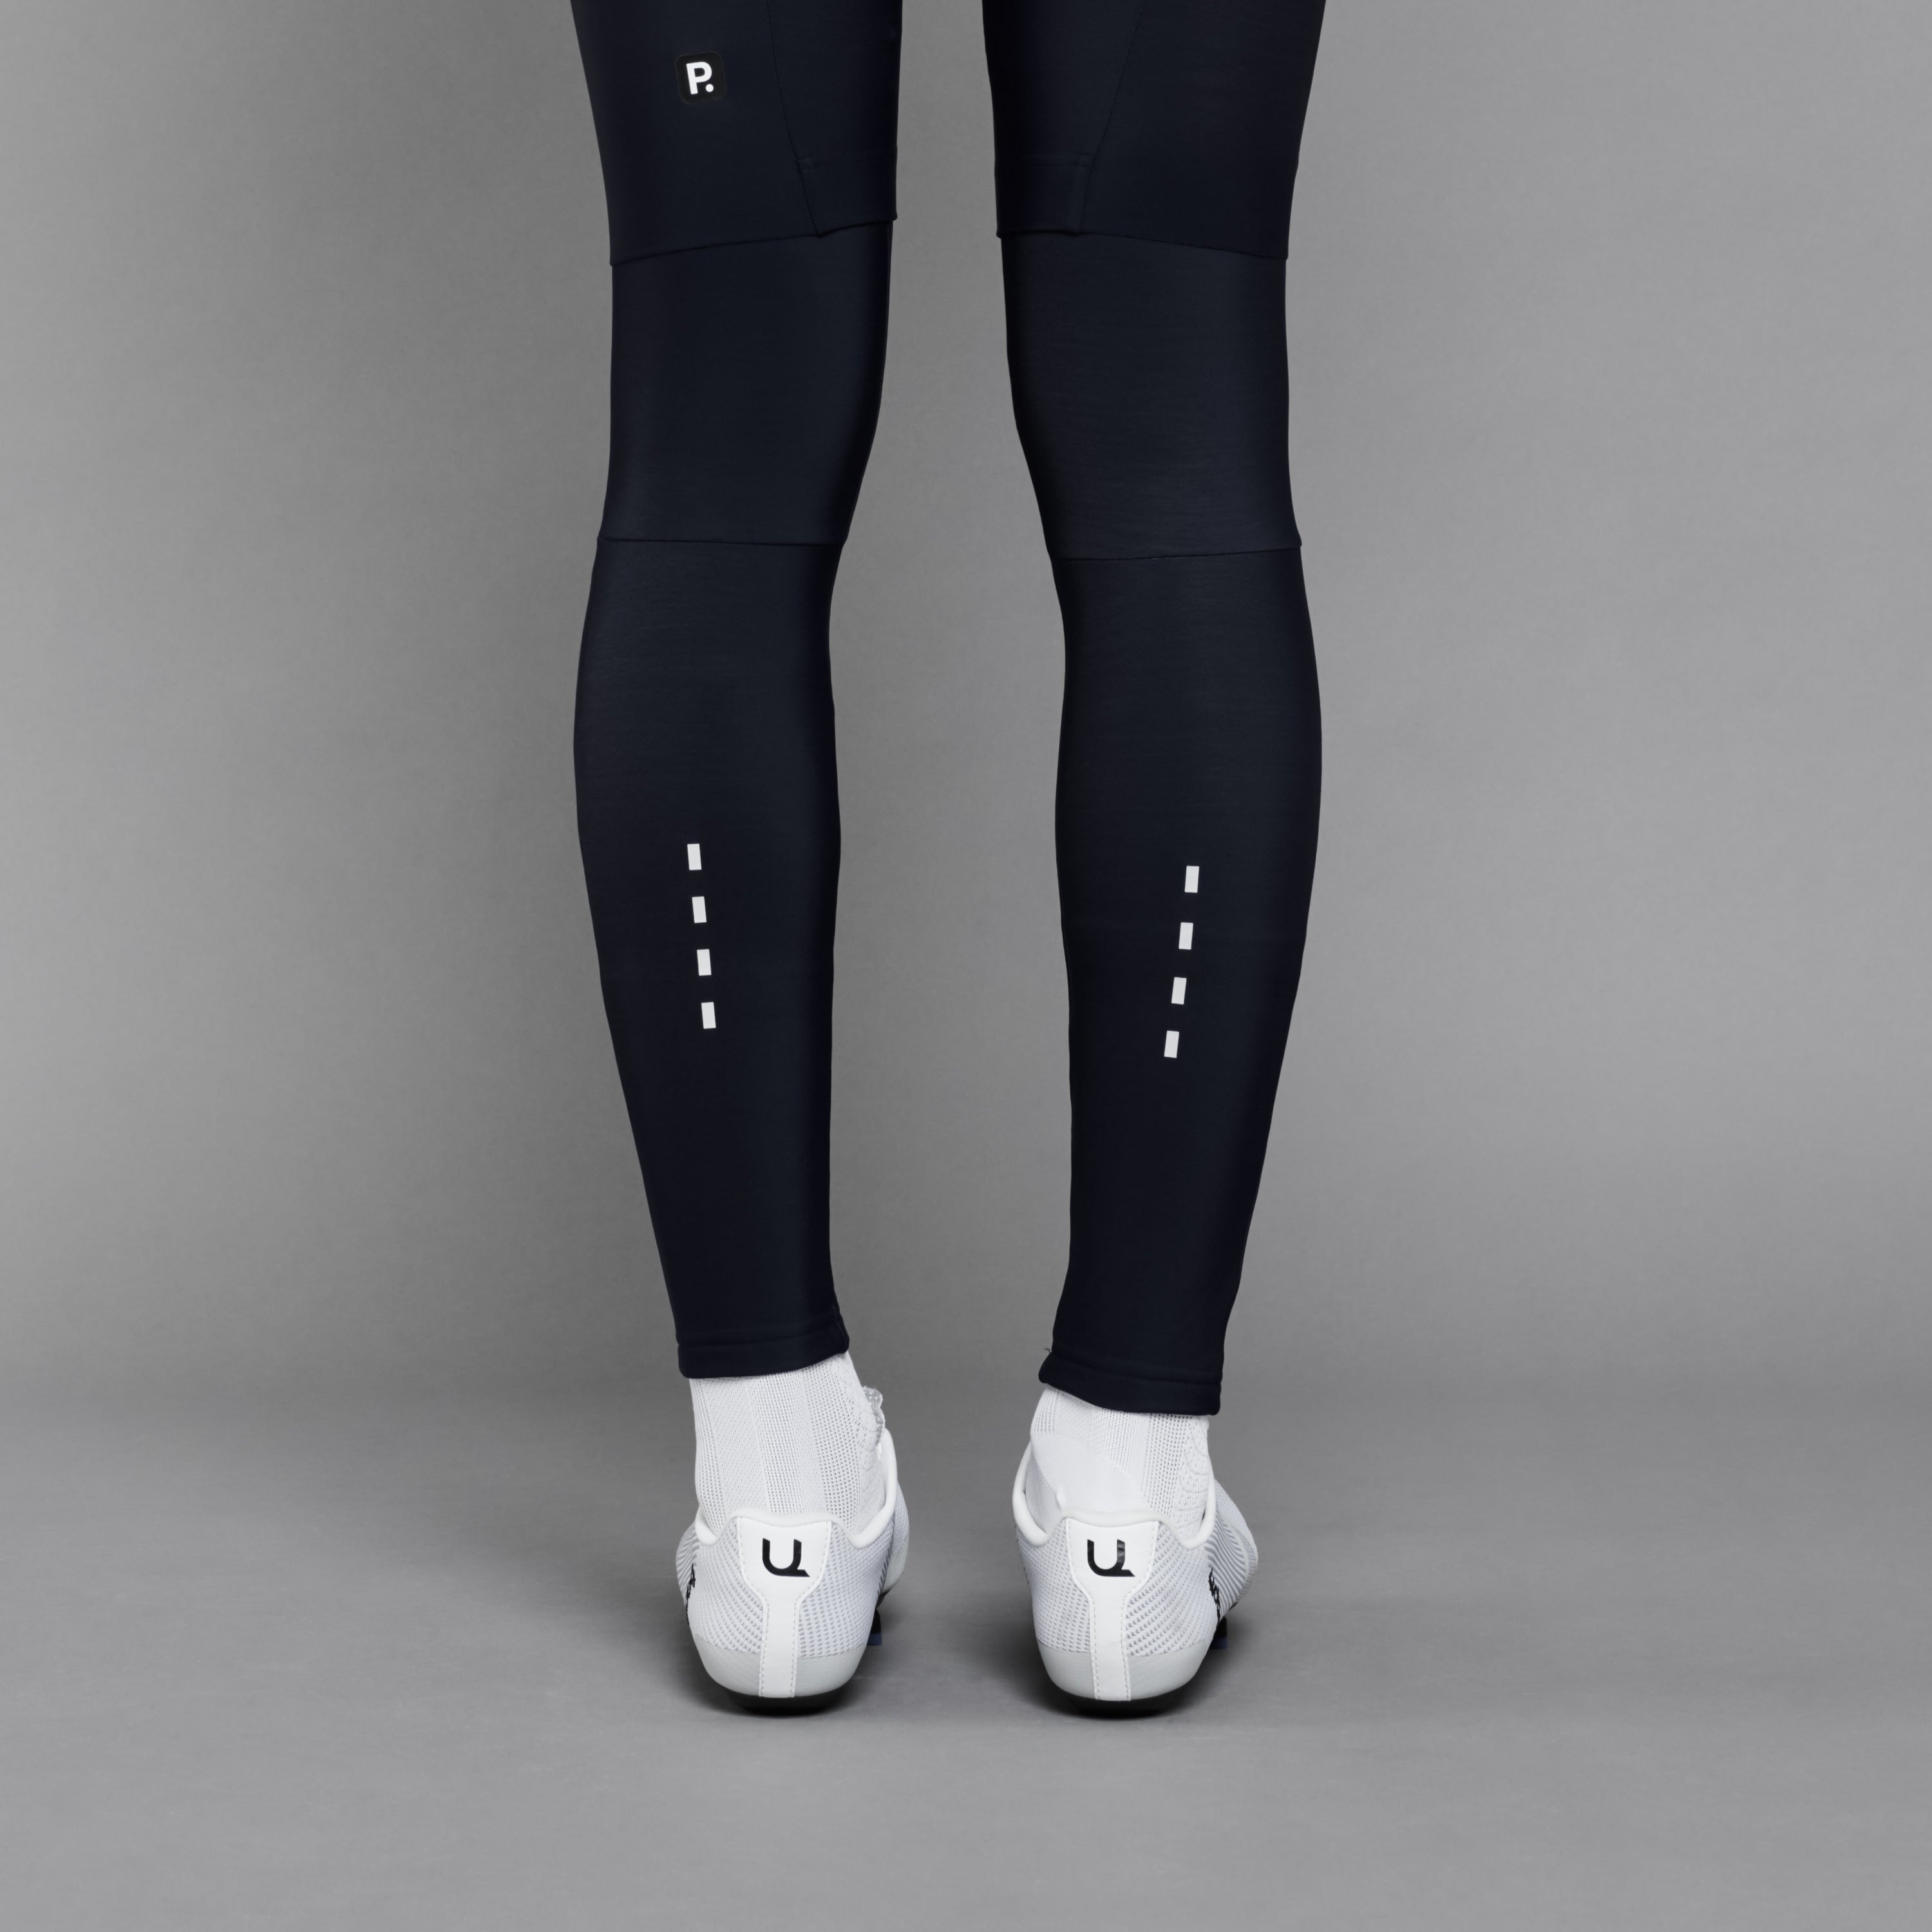 Leg Warmers Black: Unisex's Cycling Accessories